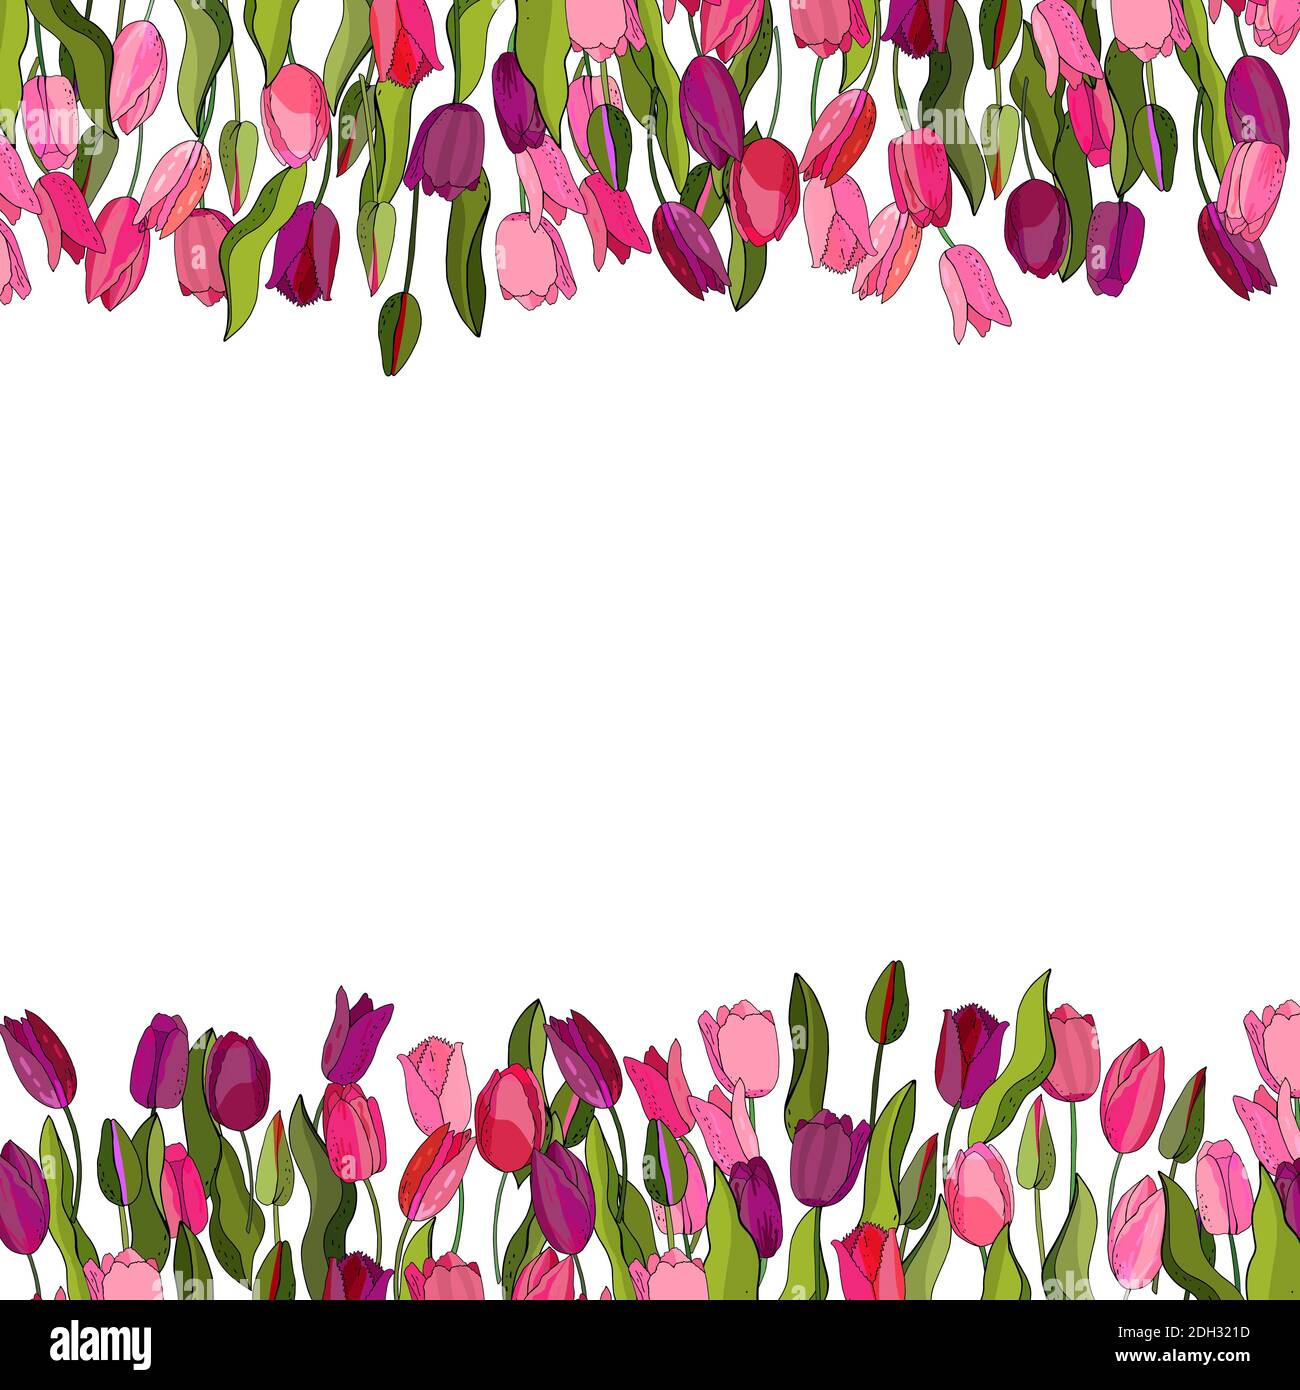 Flower template with tulips for design of invitations, cards, gift ...